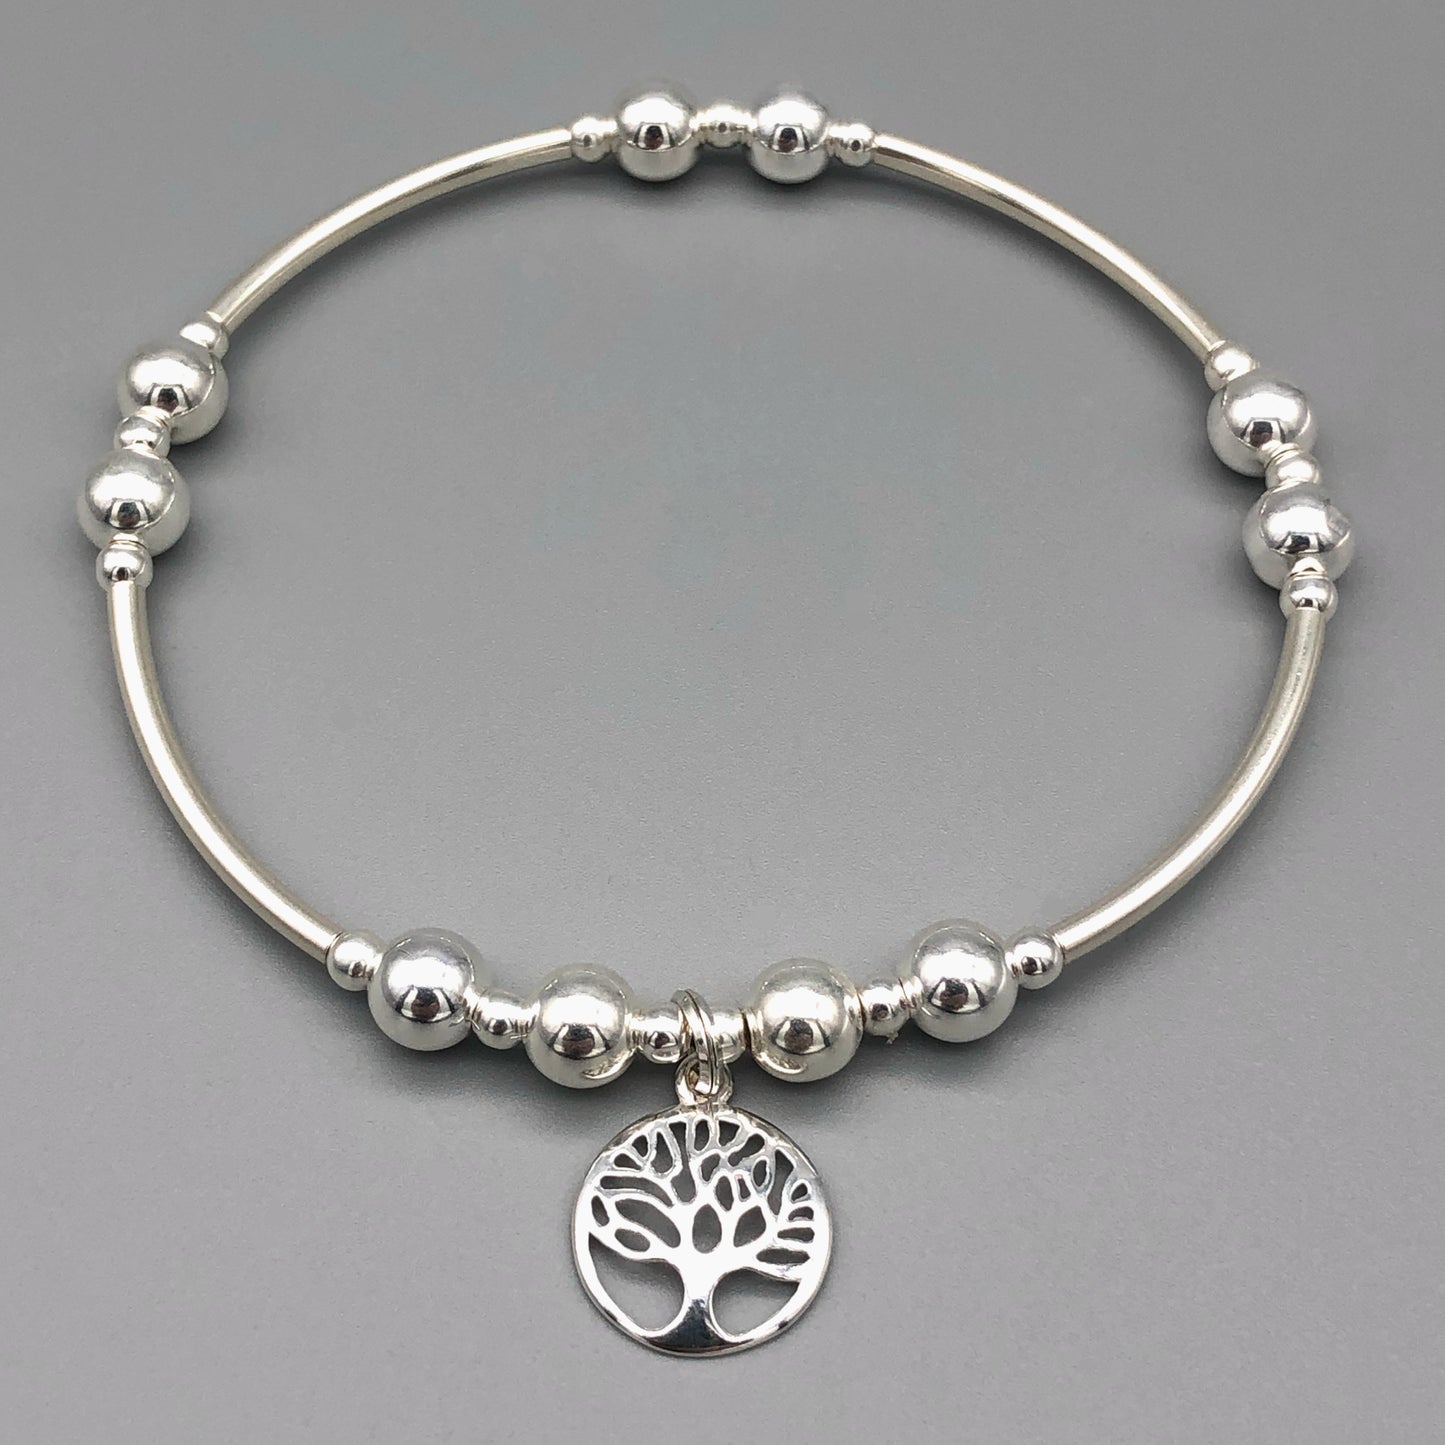 Tree of Life charm women's sterling silver stacking bracelet by My Silver Wish